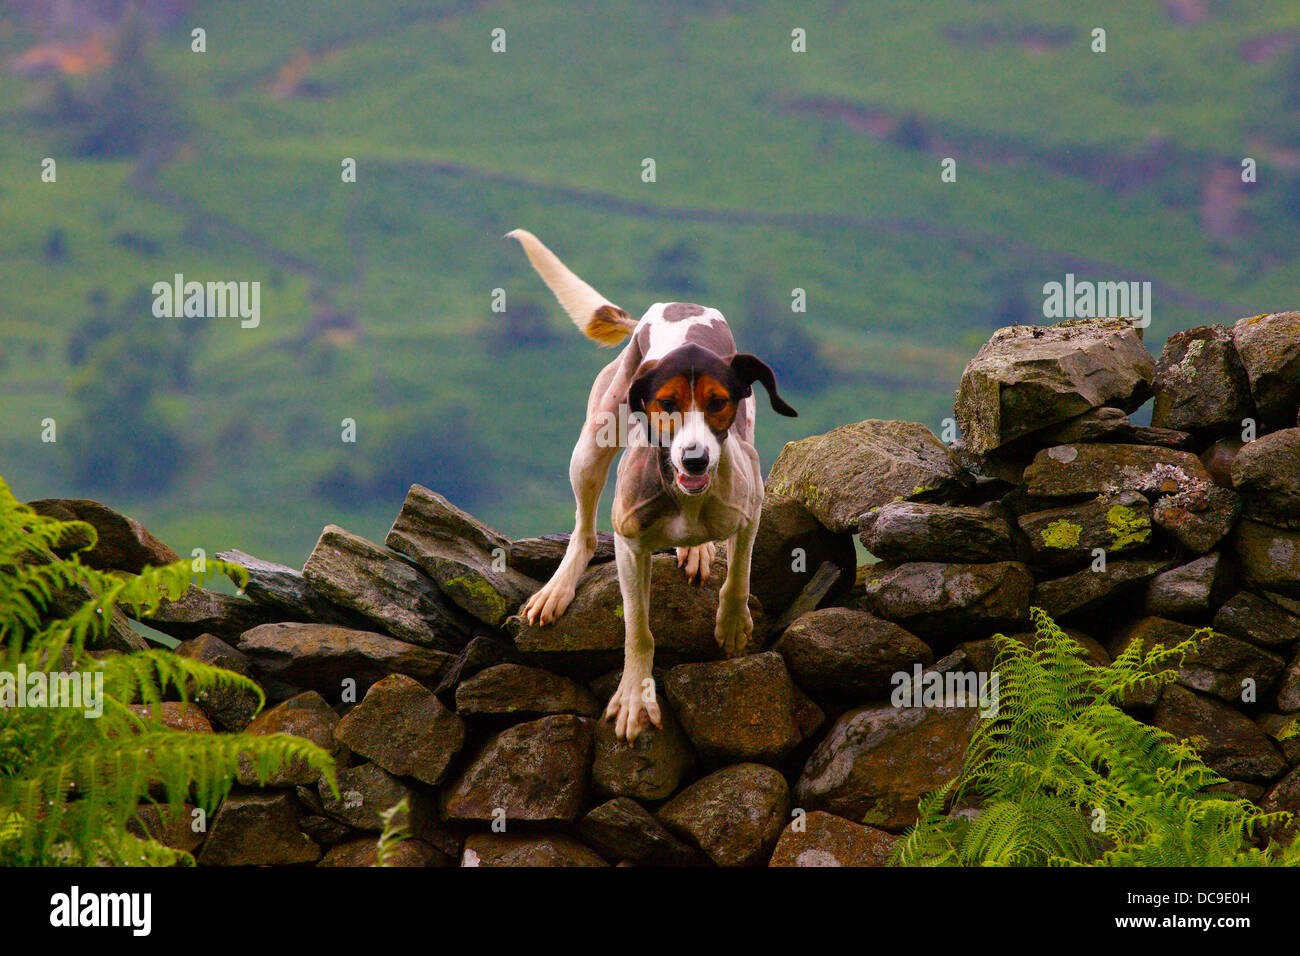 Trail Hound jumping over a dry stone wall Ambleside Sports in The Lake District, Cumbria, England, UK Stock Photo